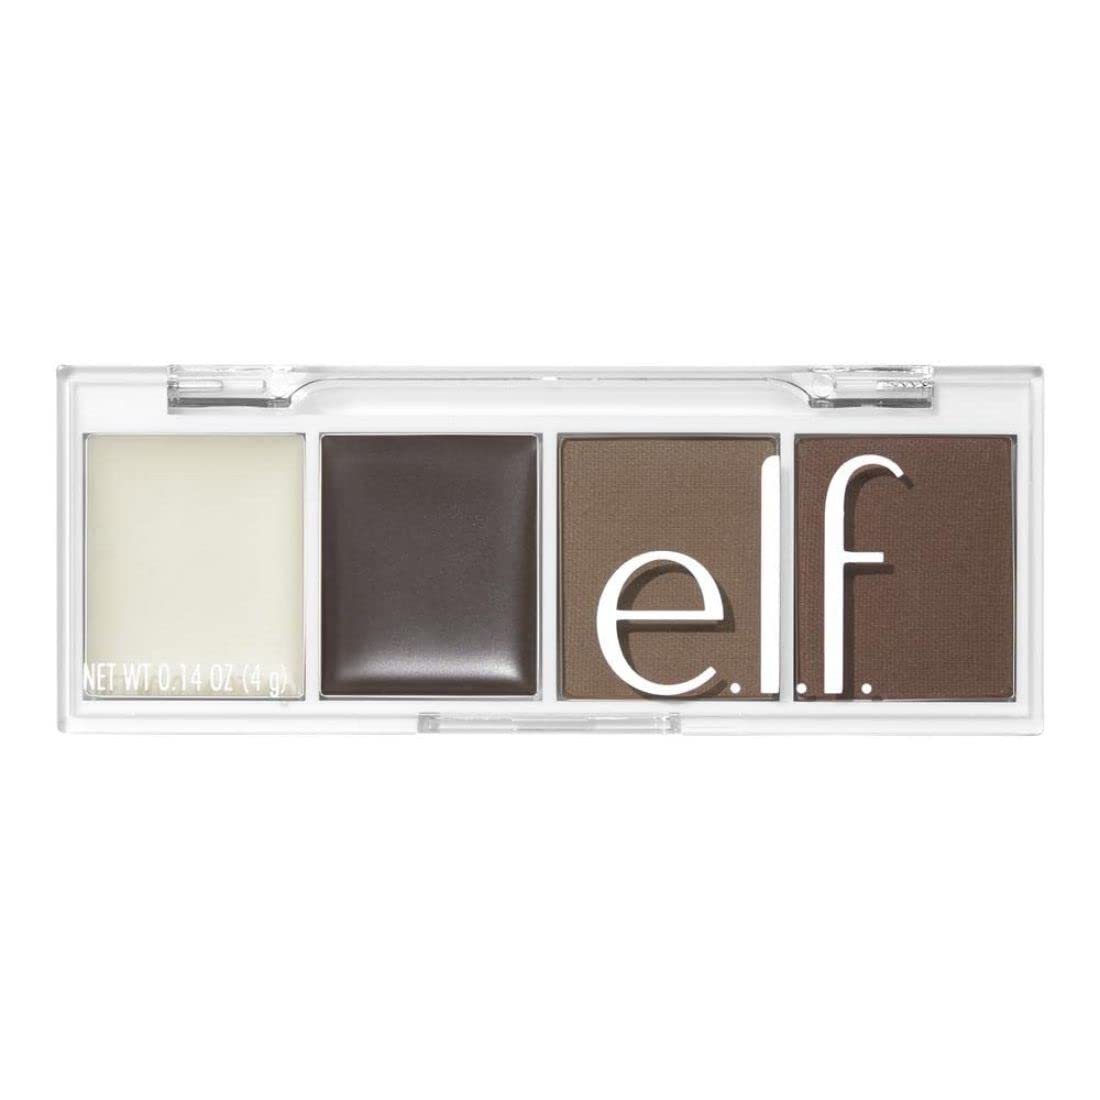 e.l.f. Bite-Size Brow, Mini Brow Quad with Ultra-Pigmented Waxes & Powders, Eyebrow Grooming & Makeup Kit, Neutral Brown, 0.14